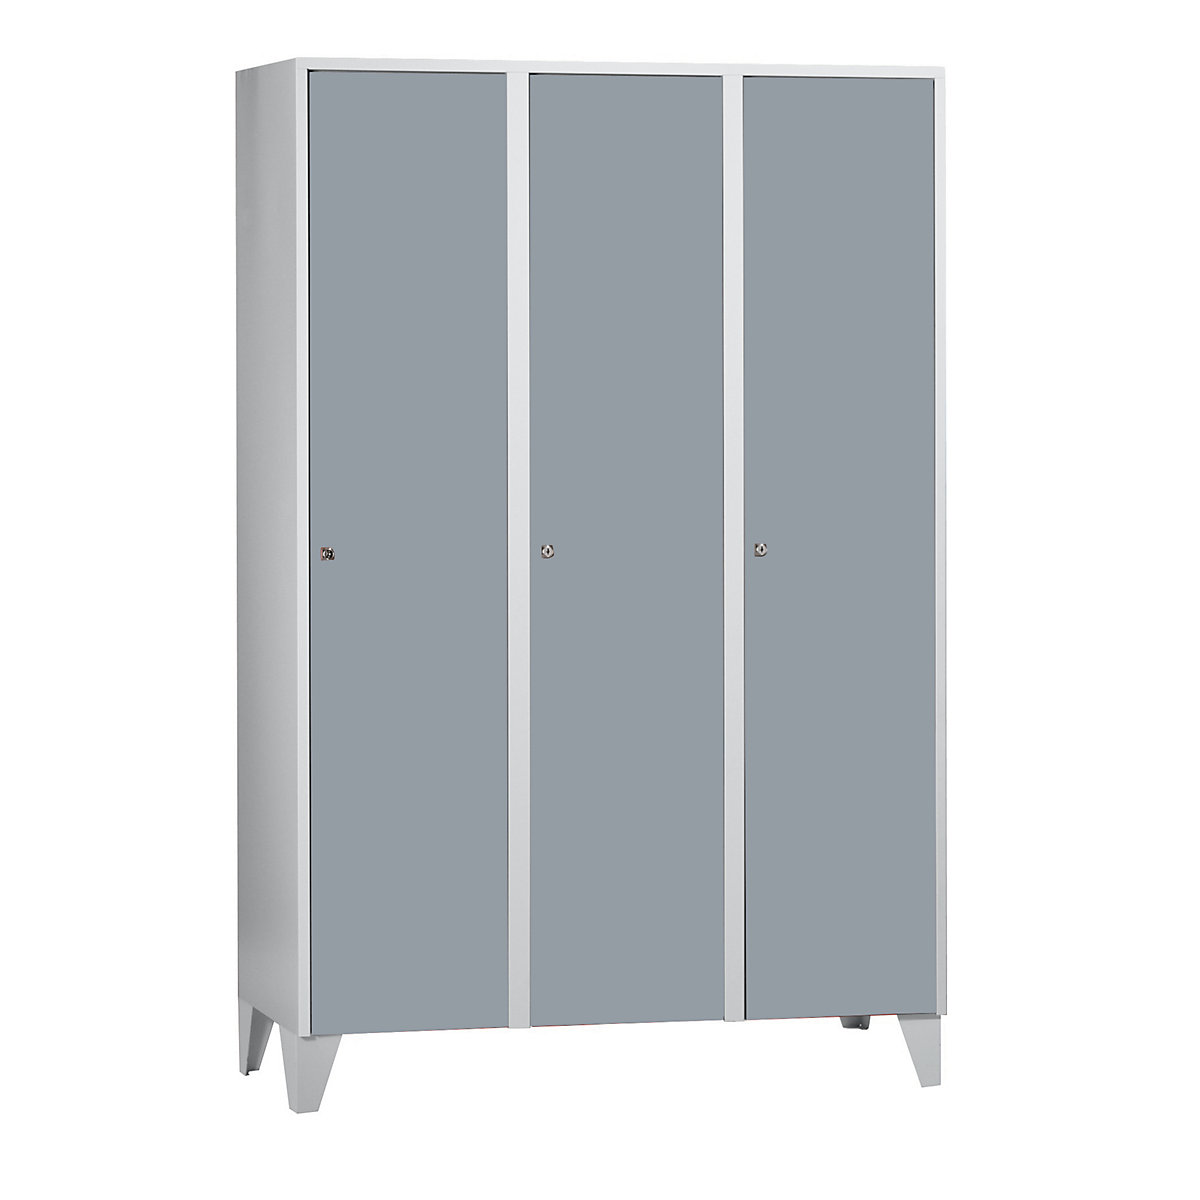 Cloakroom locker with feet – Wolf, HxWxD 1850 x 1200 x 500 mm, 3 compartments, silver grey-4